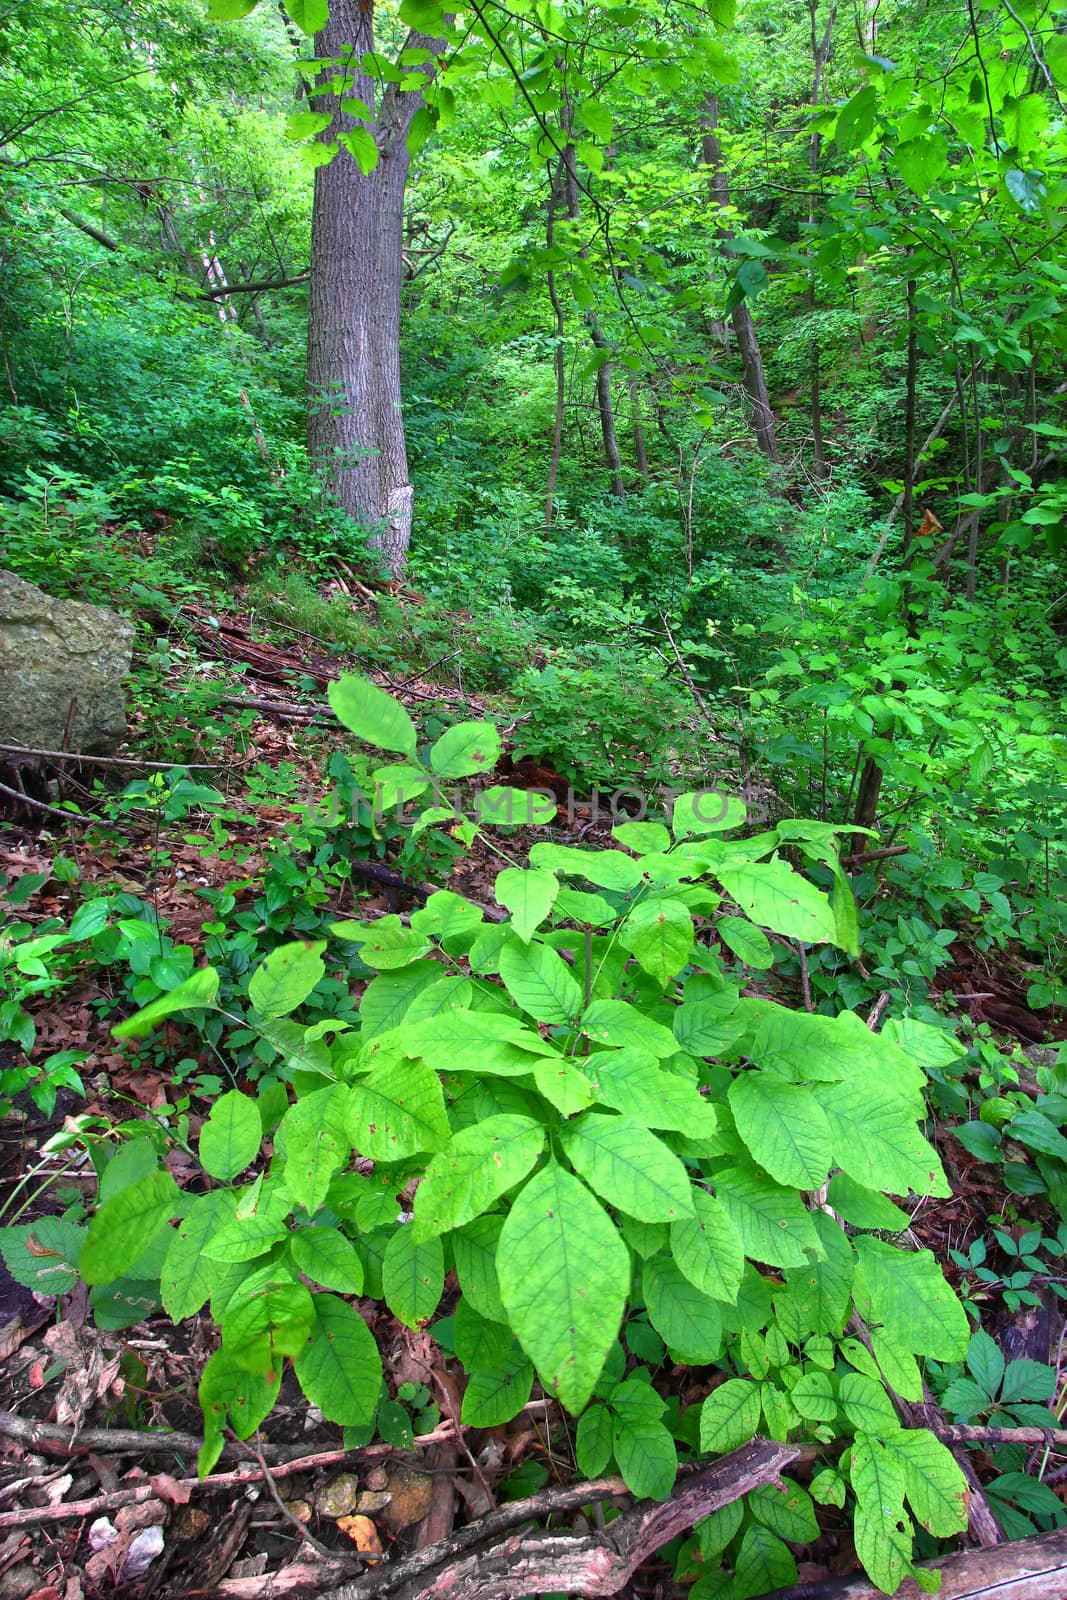 Lush green of the forest understory at Mississippi Palisades State Park in Illinois.